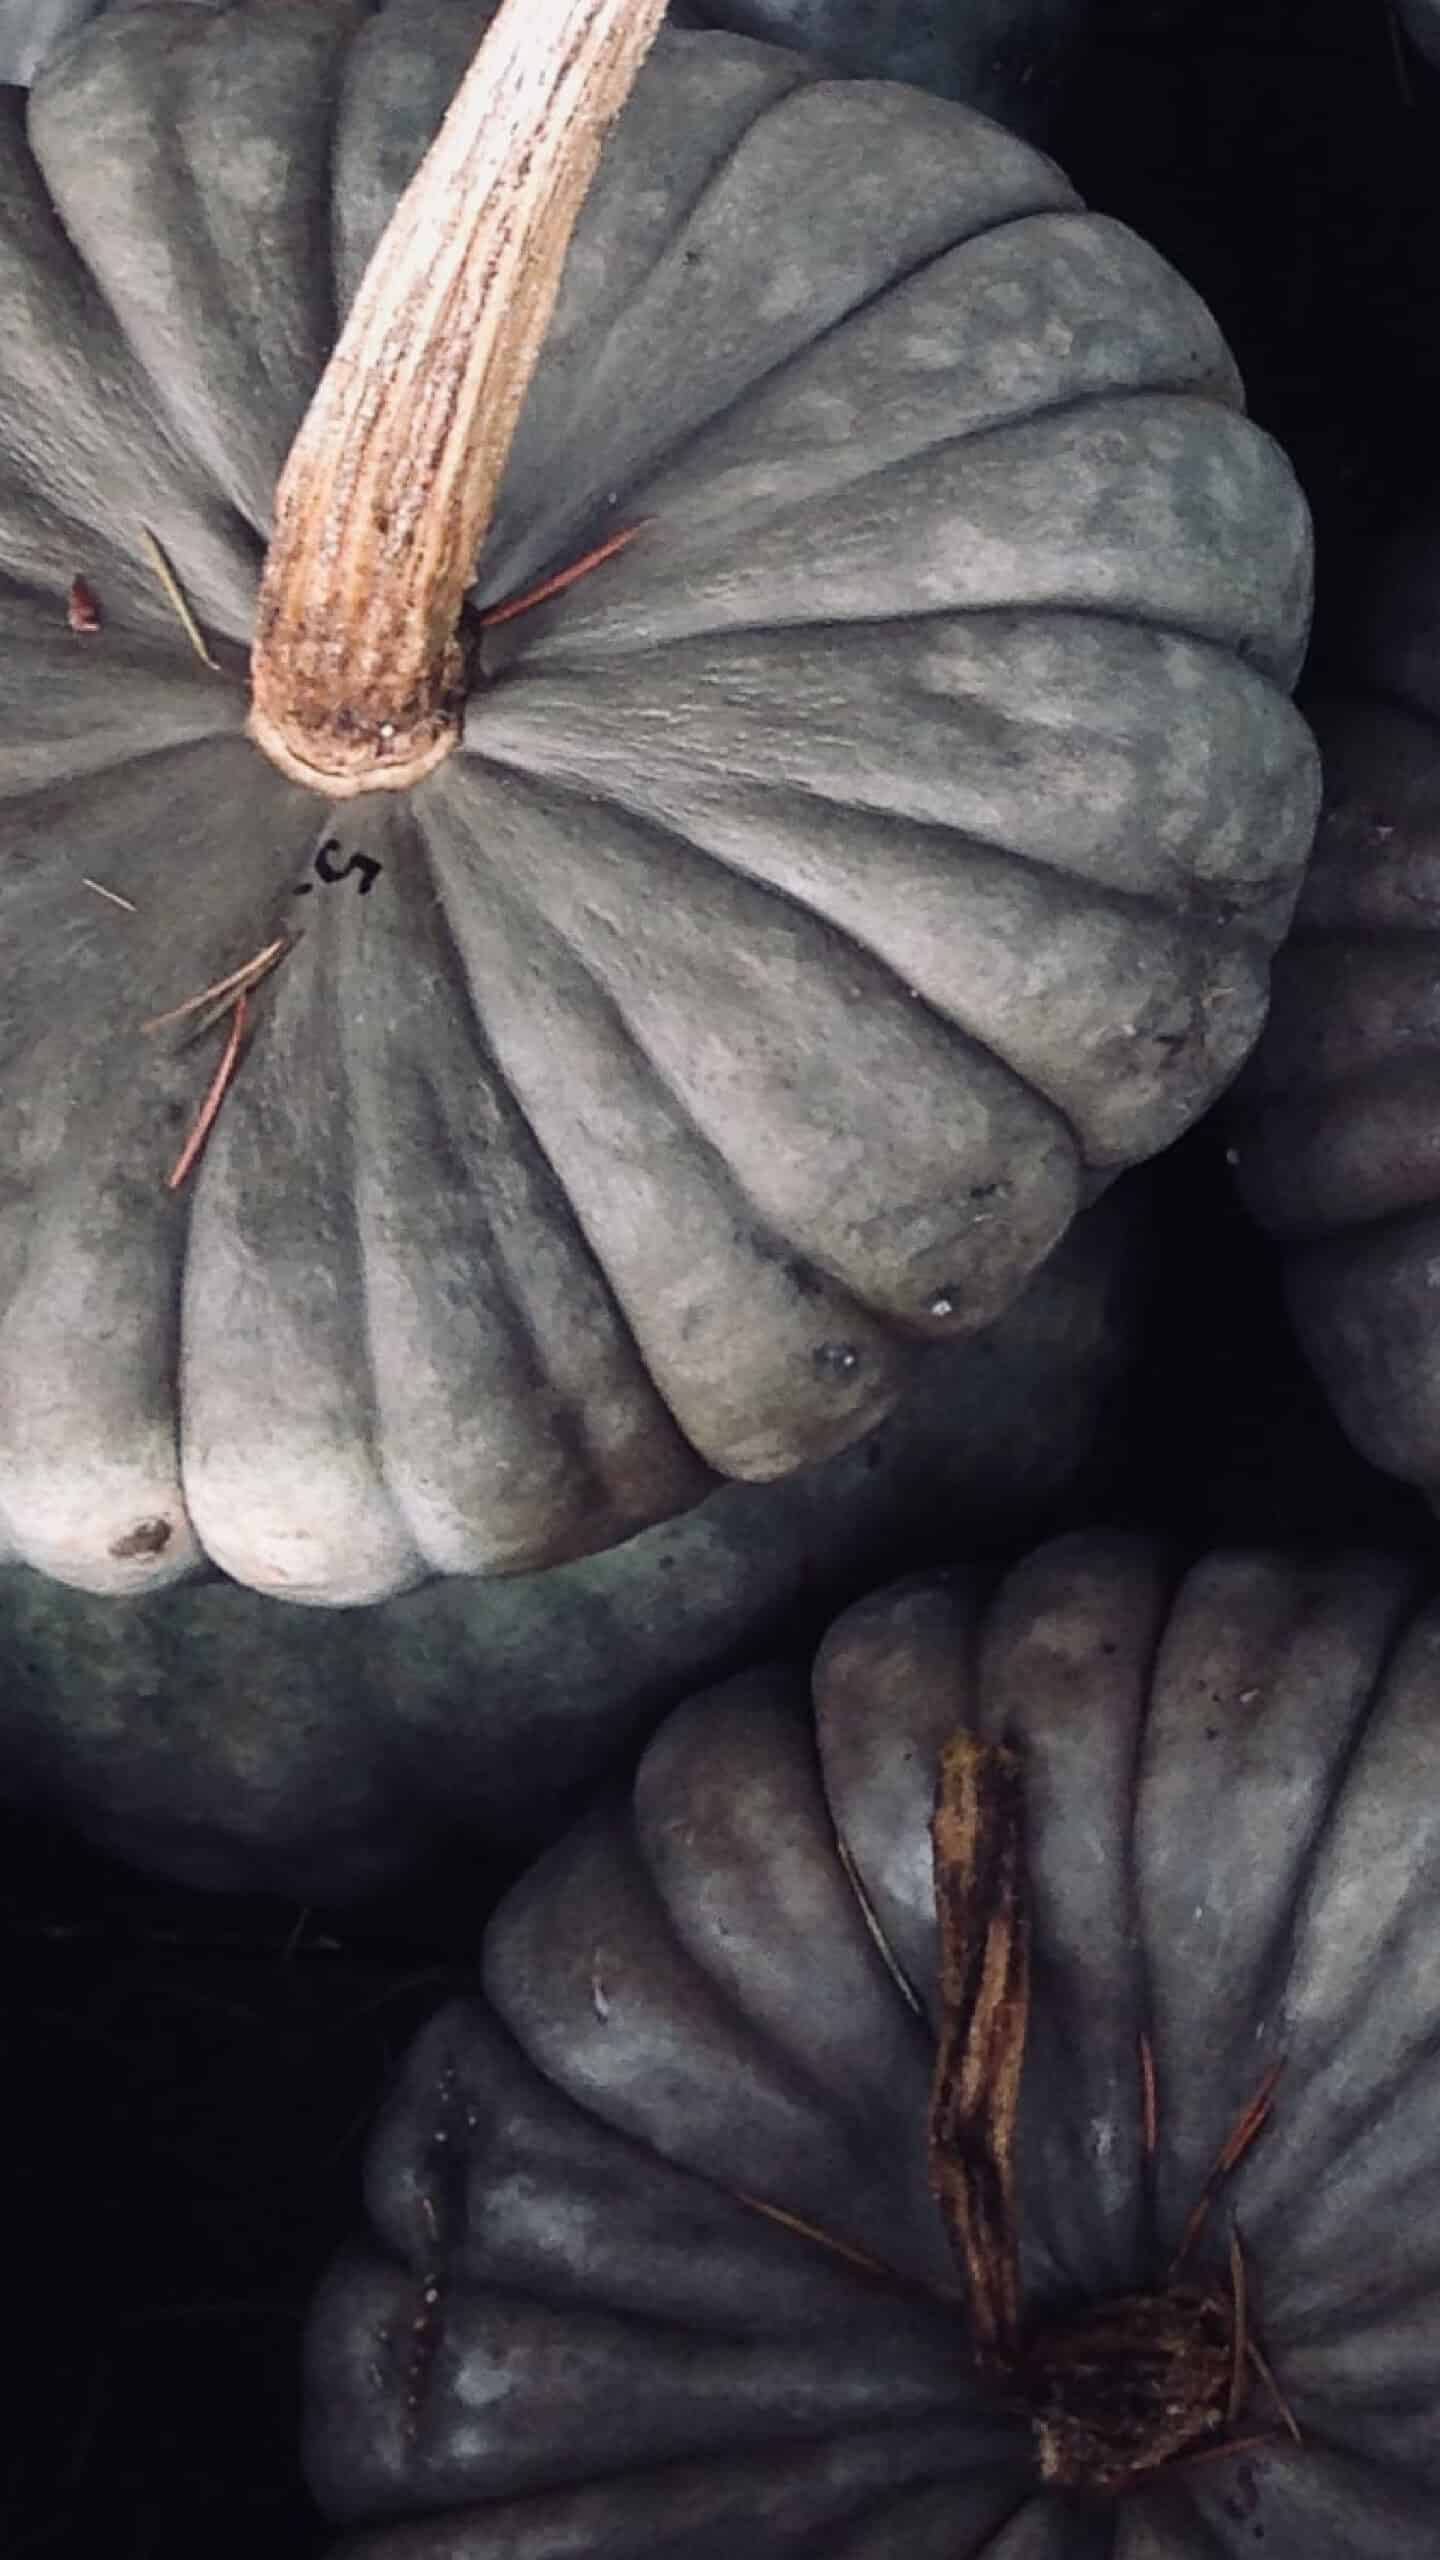 aerial shot of gray and green pumpkins in the fall November 2022 wallpapers – FREE calendars in Sunday & Monday starts + no-calendar designs. 59 beautiful options for desktop & smart phones!